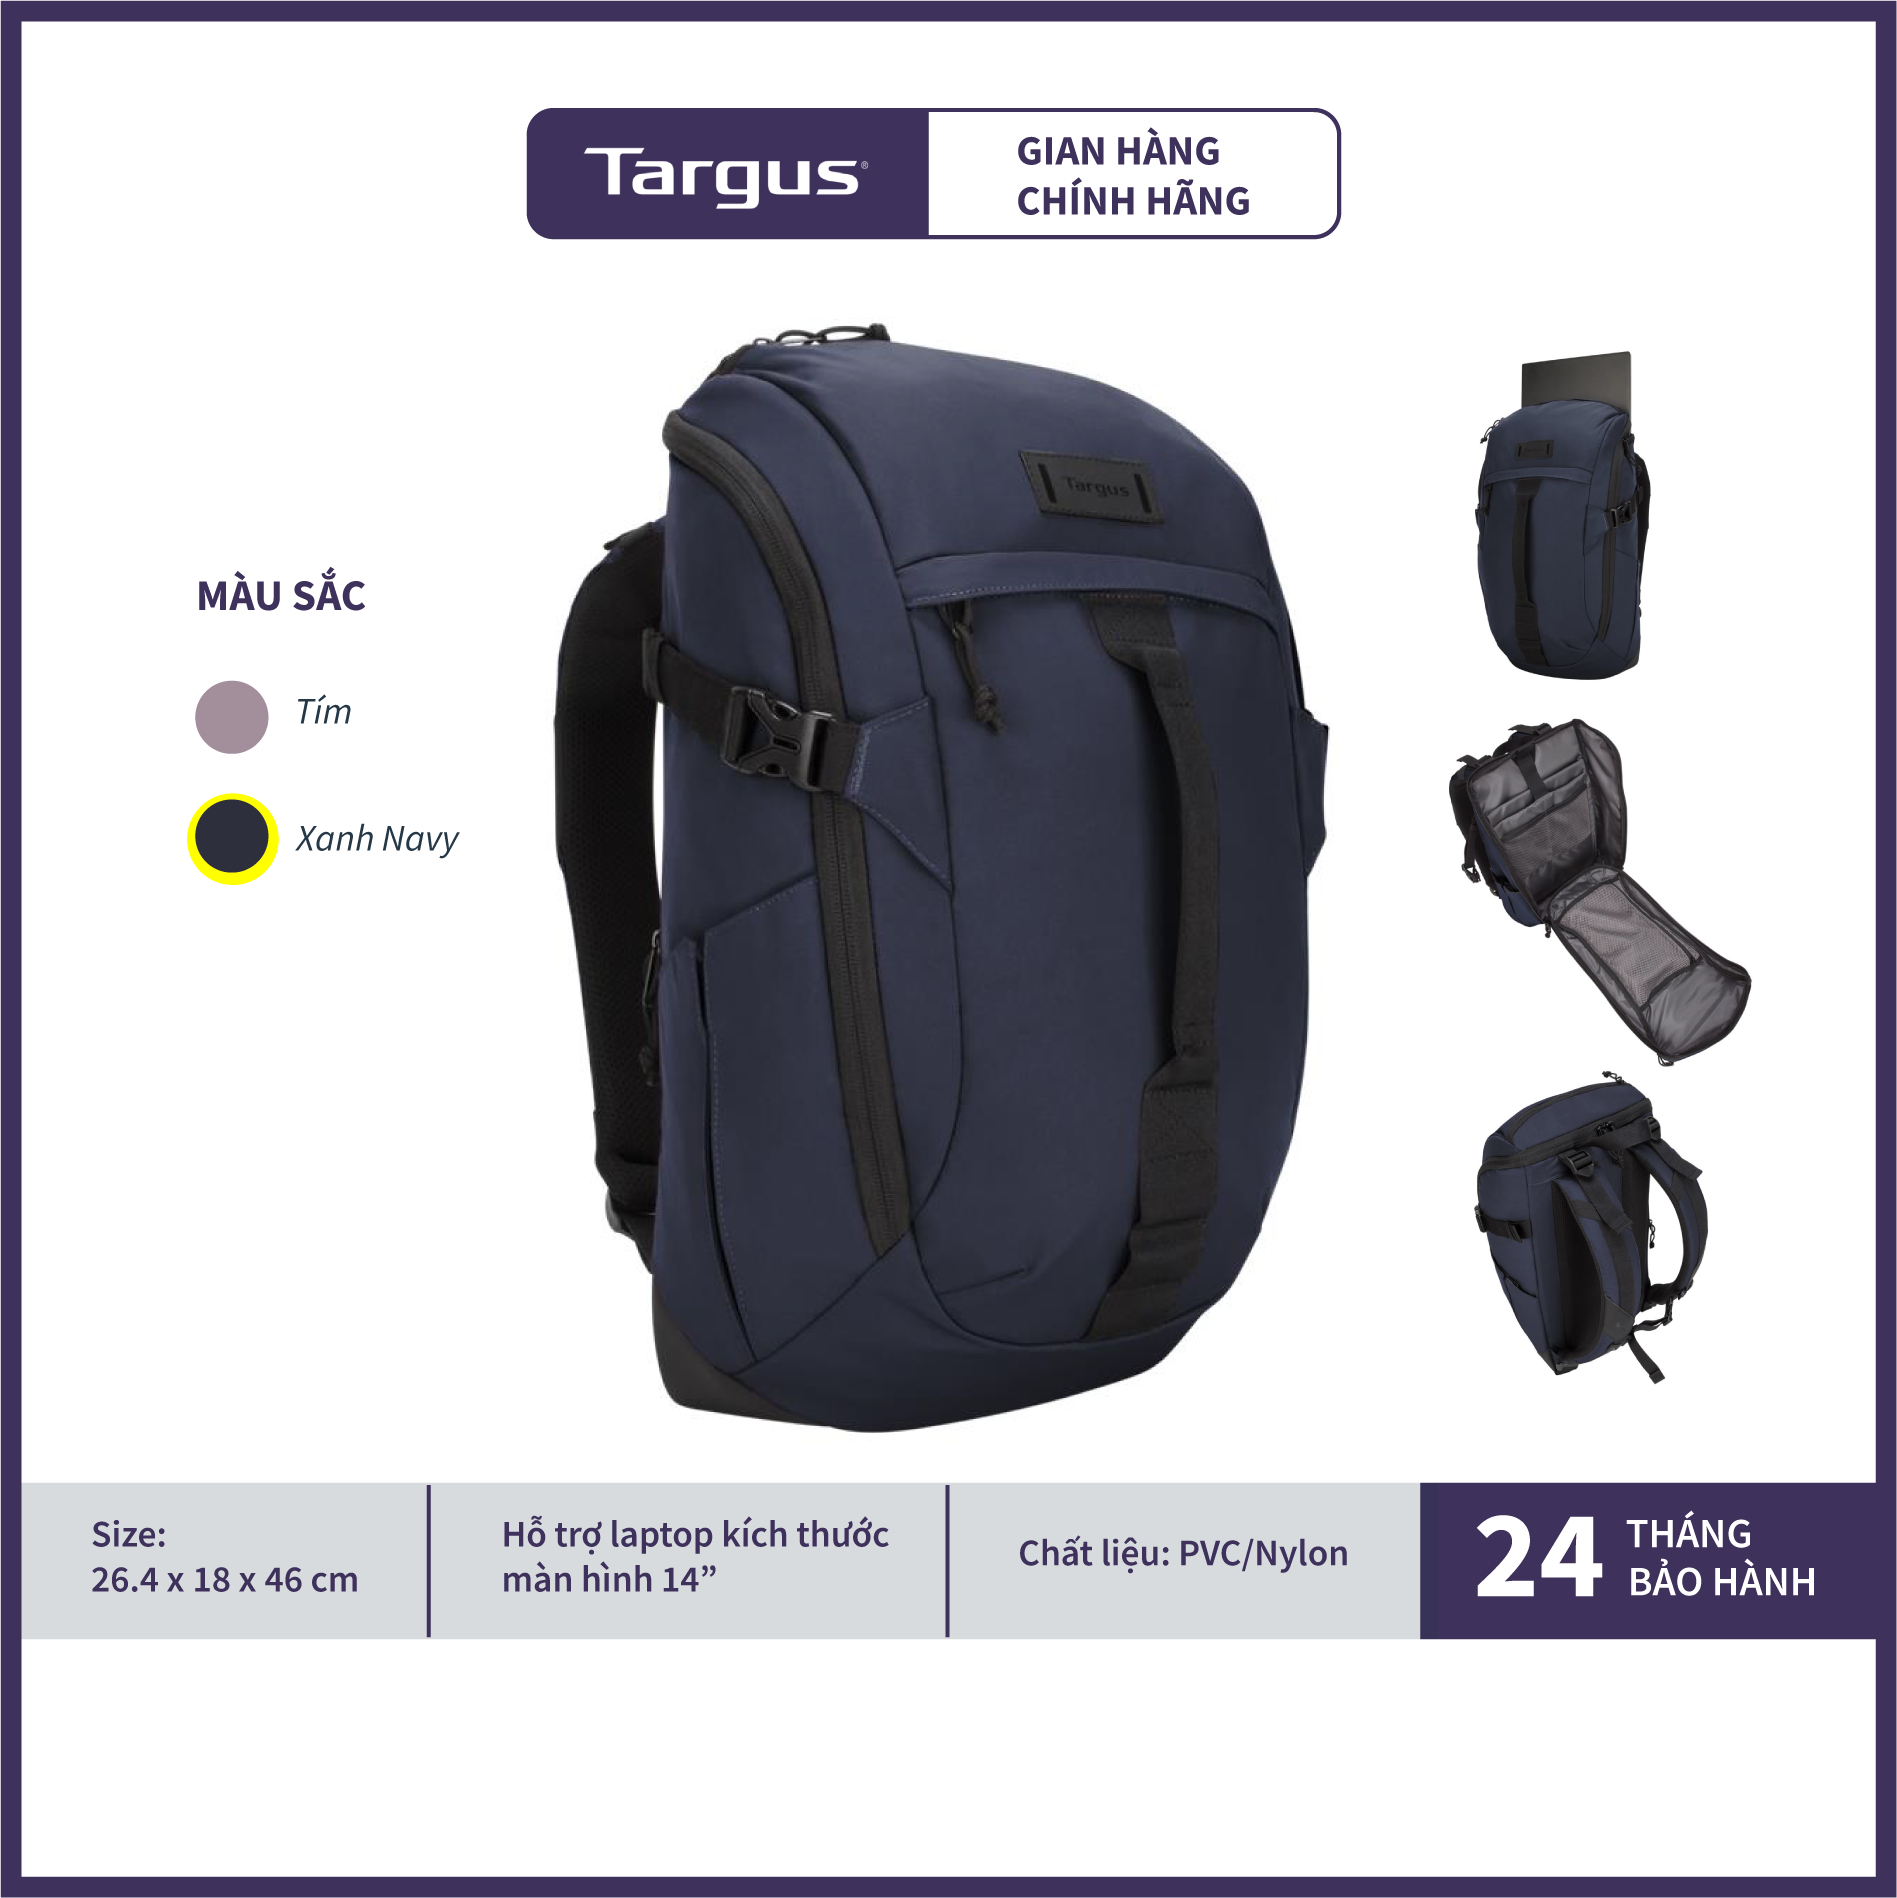 Targus made a backpack with a built-in Find My tracker